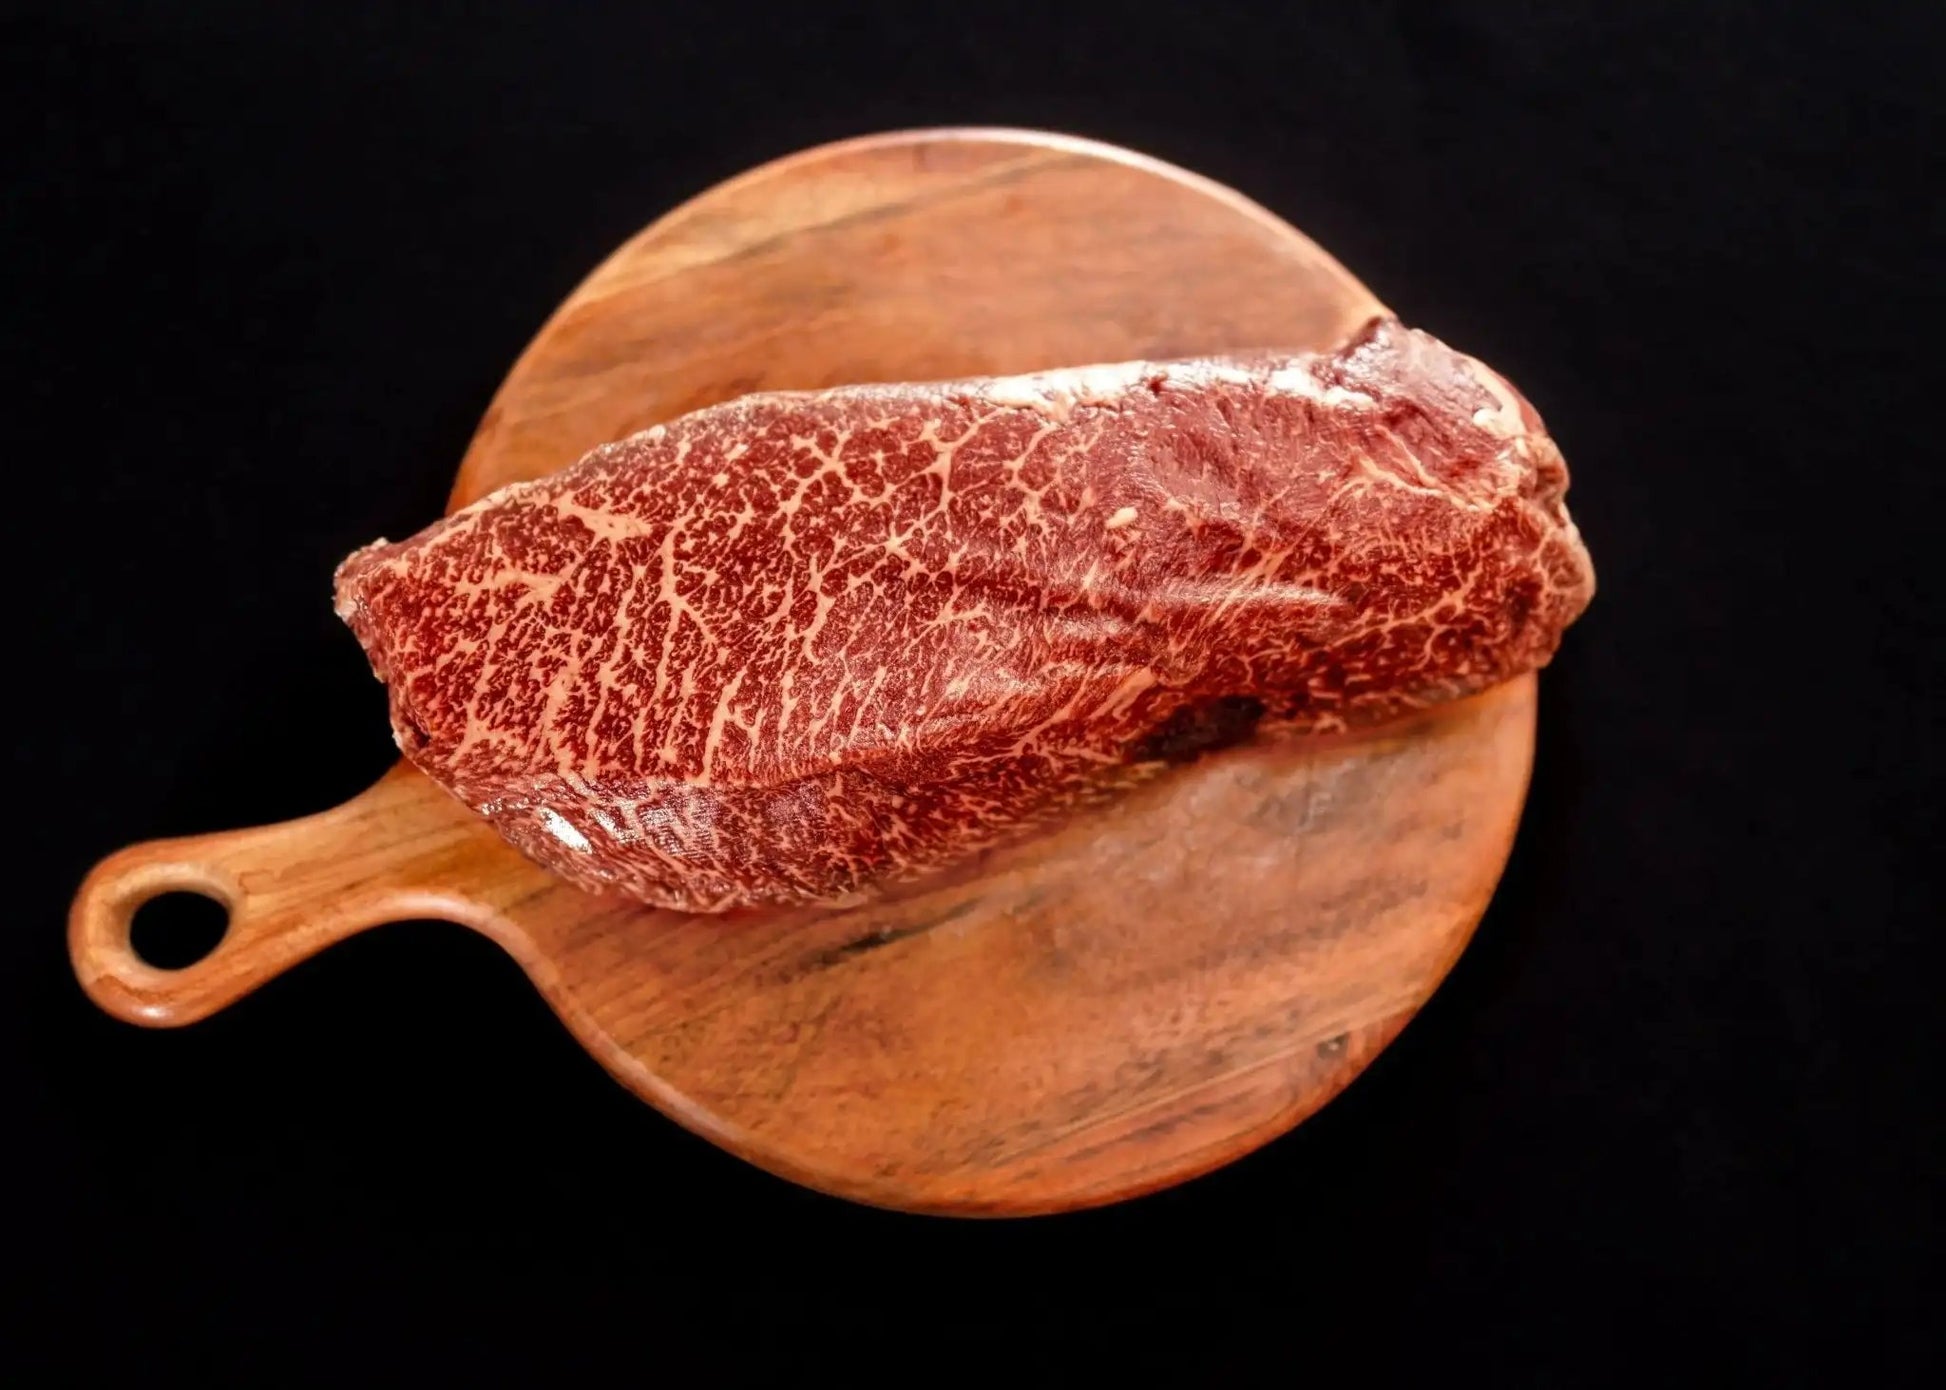 100% All-Natural Grass-Fed Pasture-Raised Wagyu London Broil








Introducing Hufeisen Ranch's 100% All-Natura lGrass-Fed Pasture-Raised Wagyu London Broil, the ultimate in premium beef cuts. Sourced from the upper thigh p100%The Hufeisen-Ranch (WYO Wagyu)